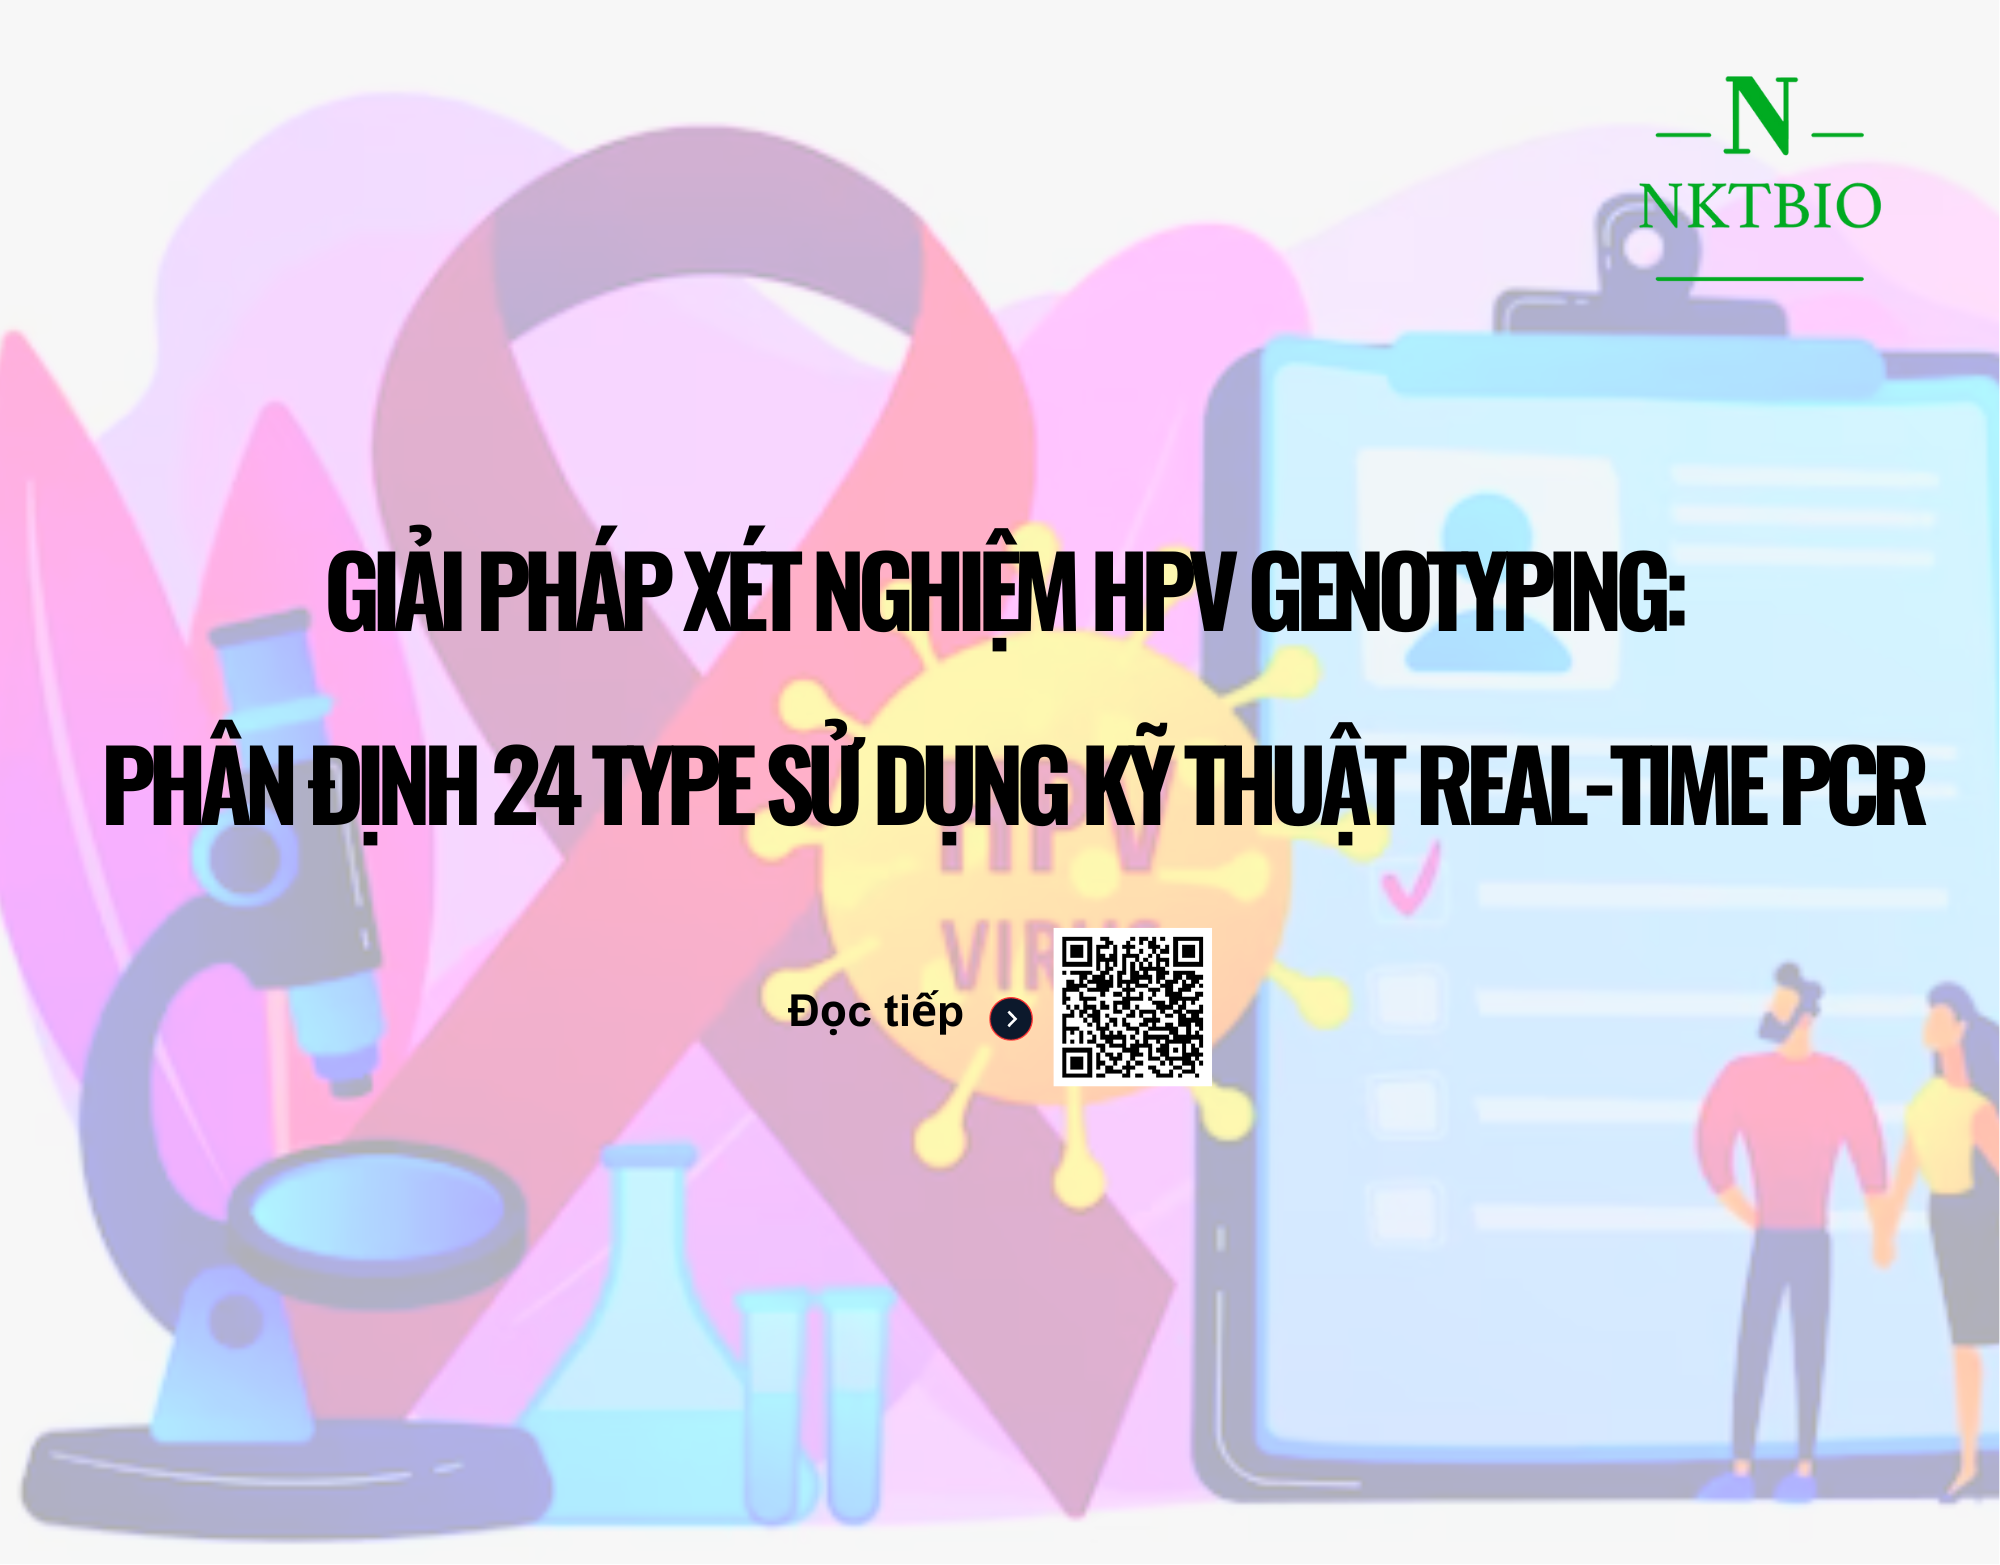 Giai-phap-xet-nghiem-HPV-genotyping-phan-dinh-24-type-su-dung-ky-thuat-Real-time-PCR